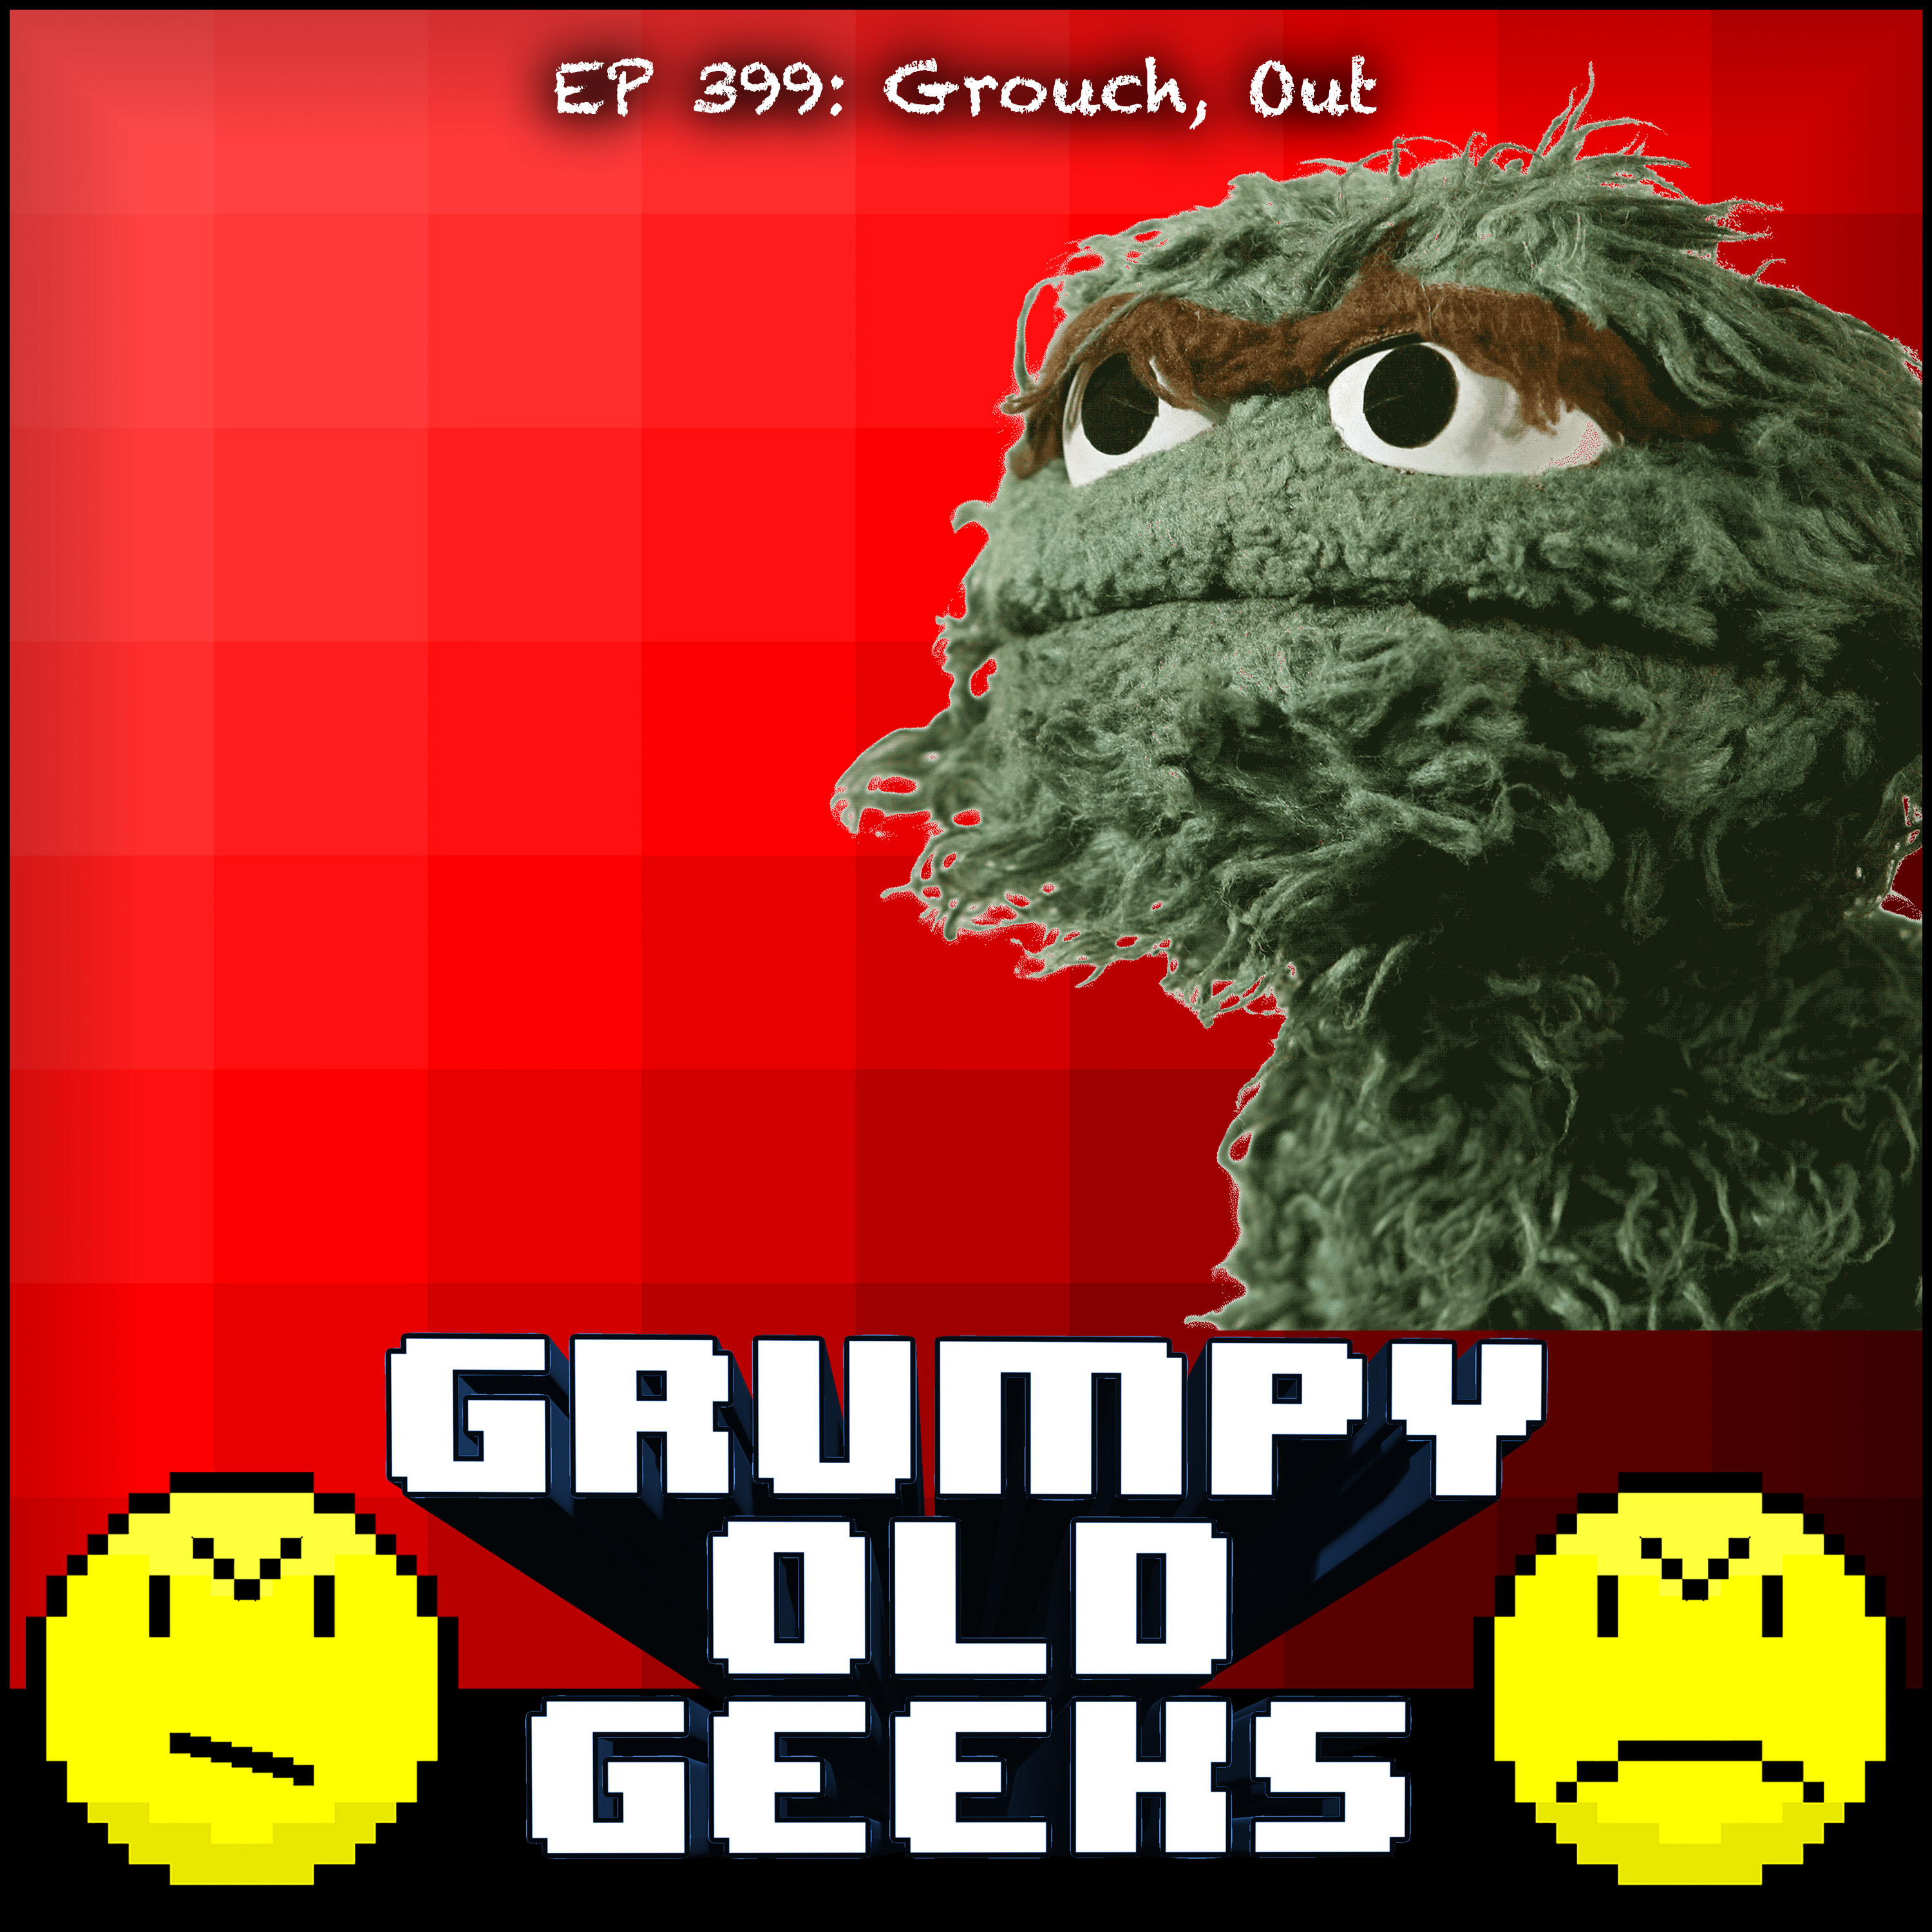 399: Grouch, Out. Image